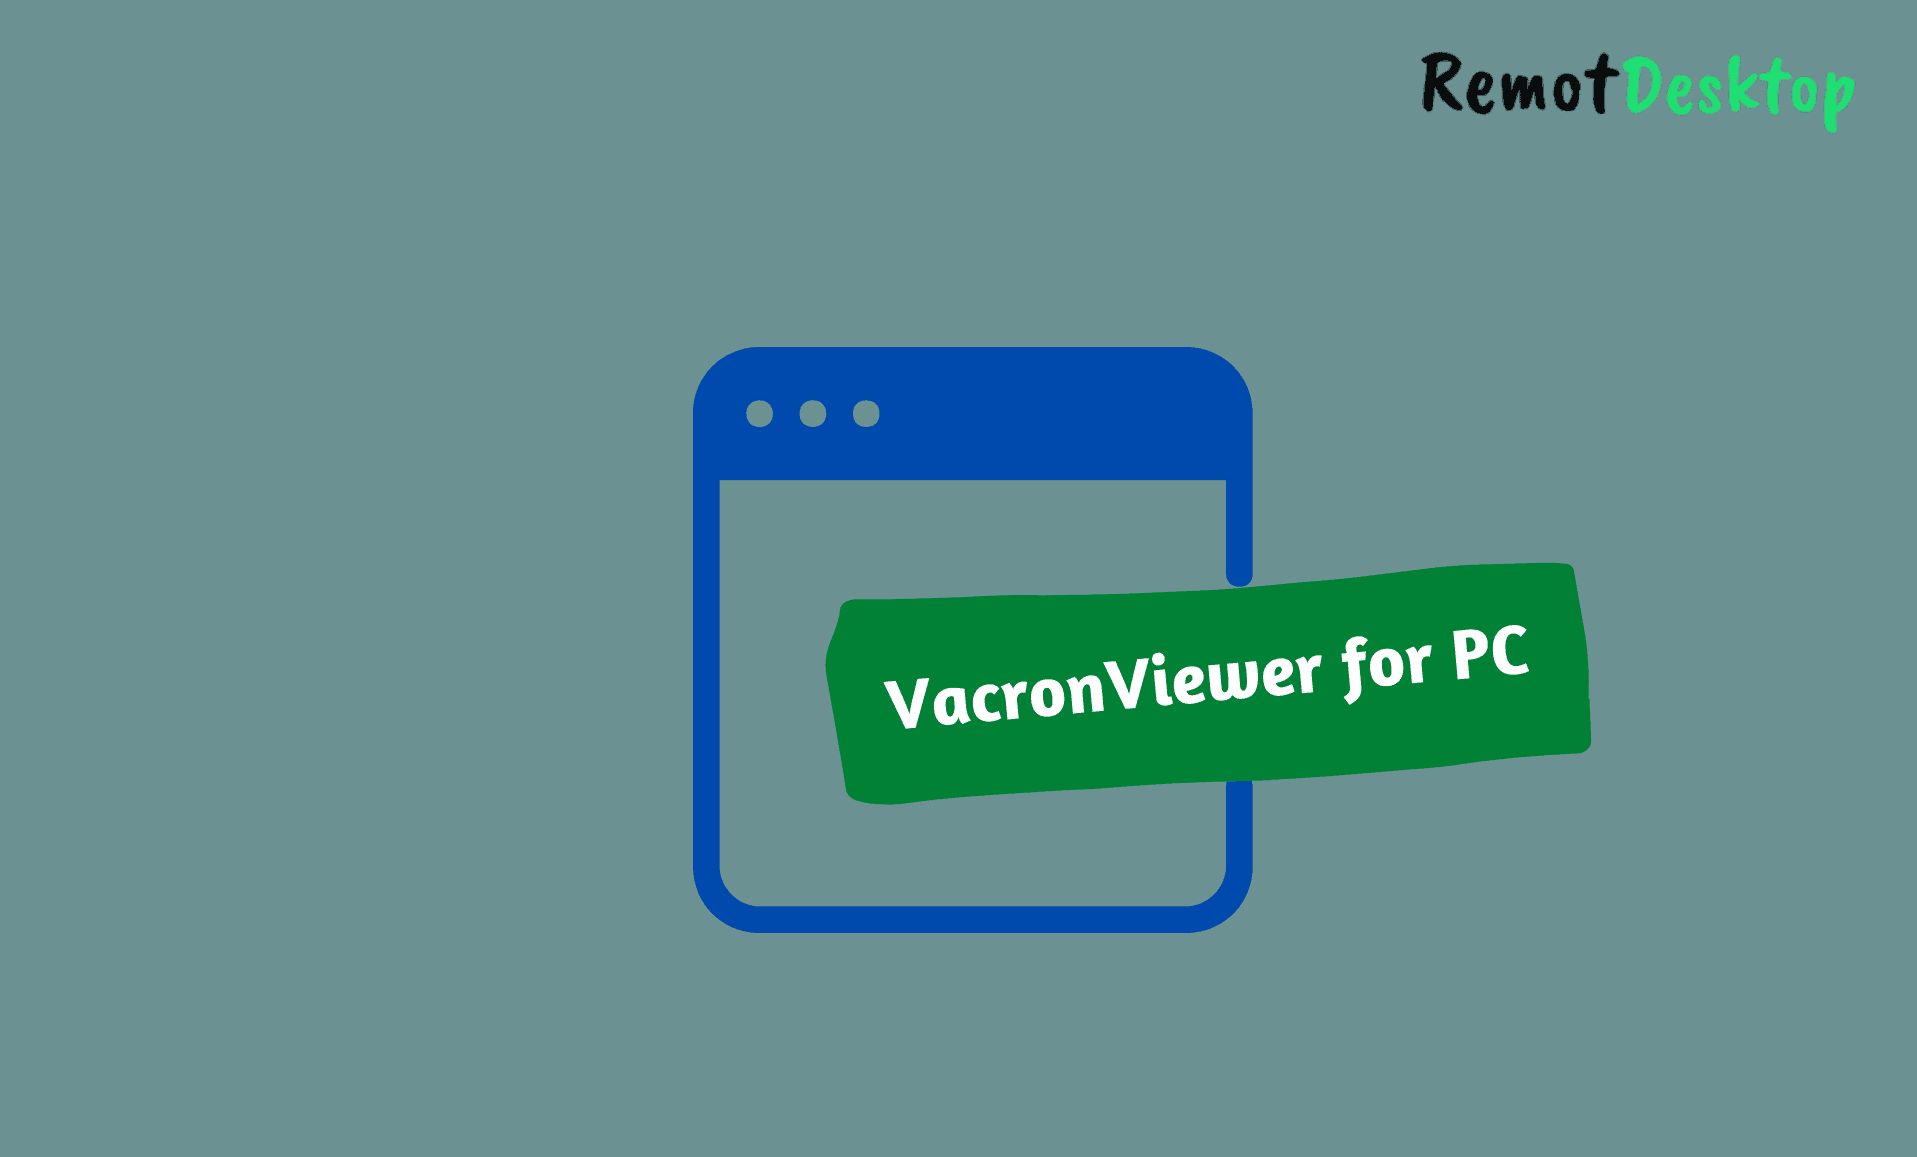 VacronViewer for PC